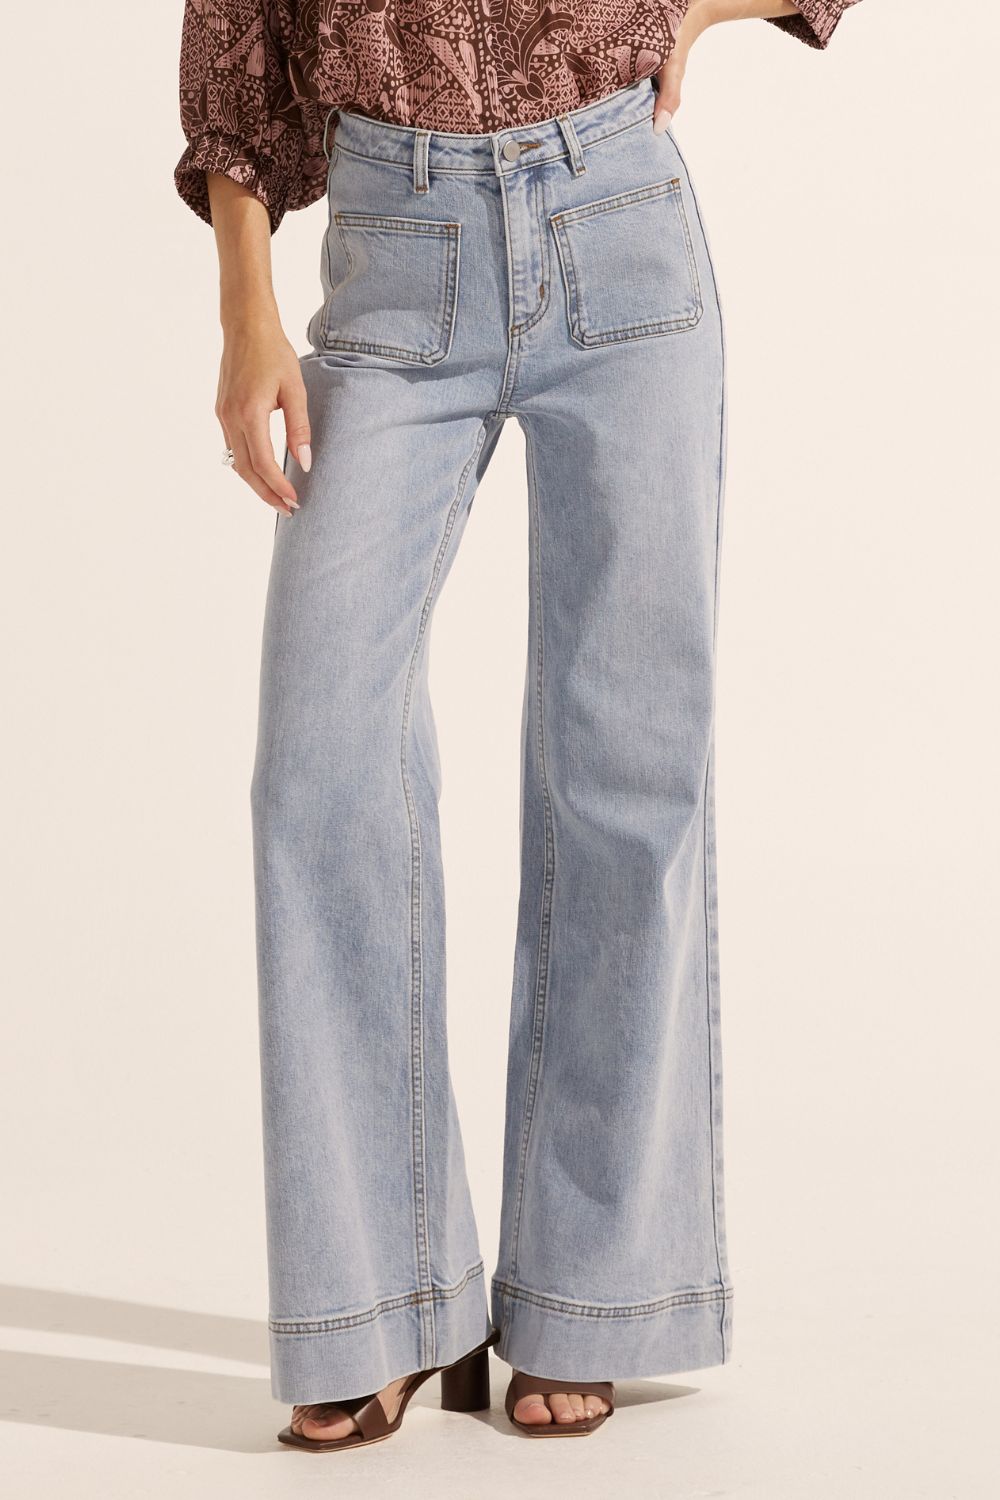 theory jean - light washed denim